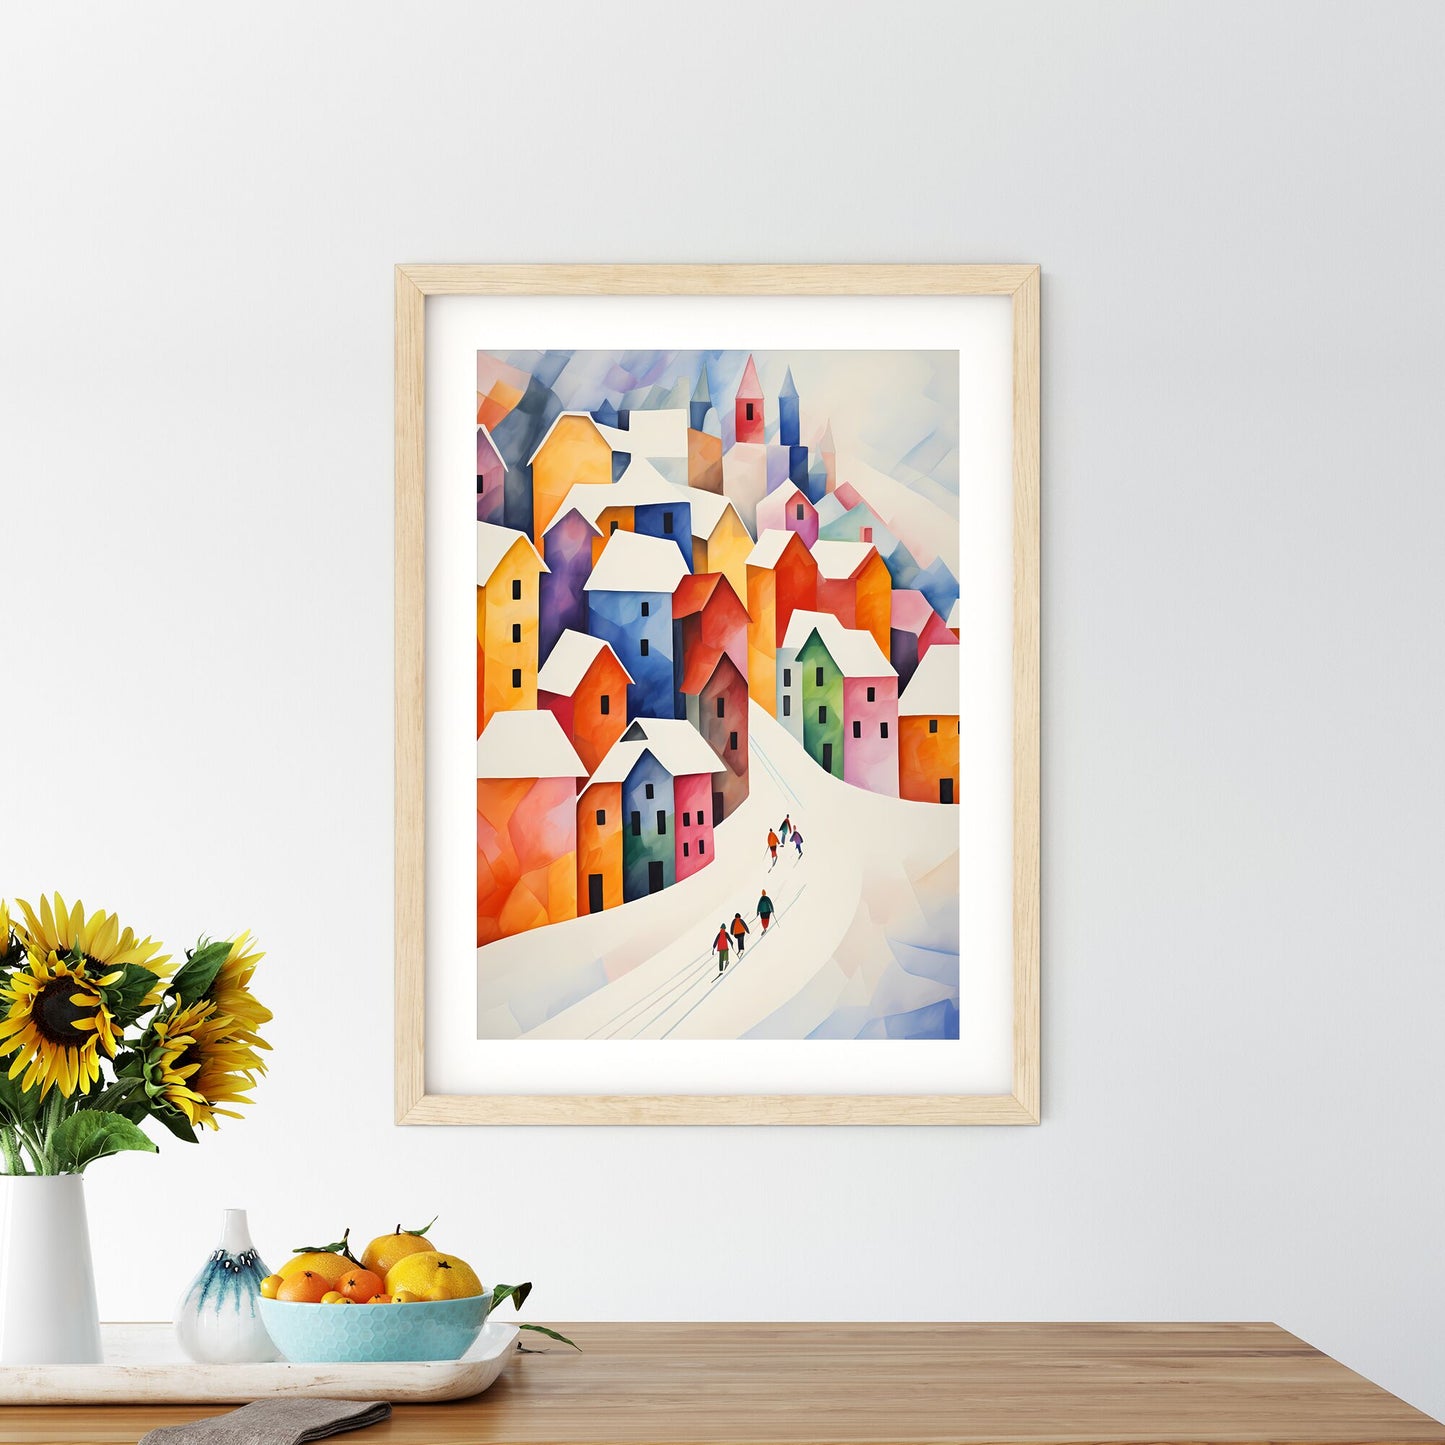 A Group Of People Walking Down A Snowy Street Art Print Default Title